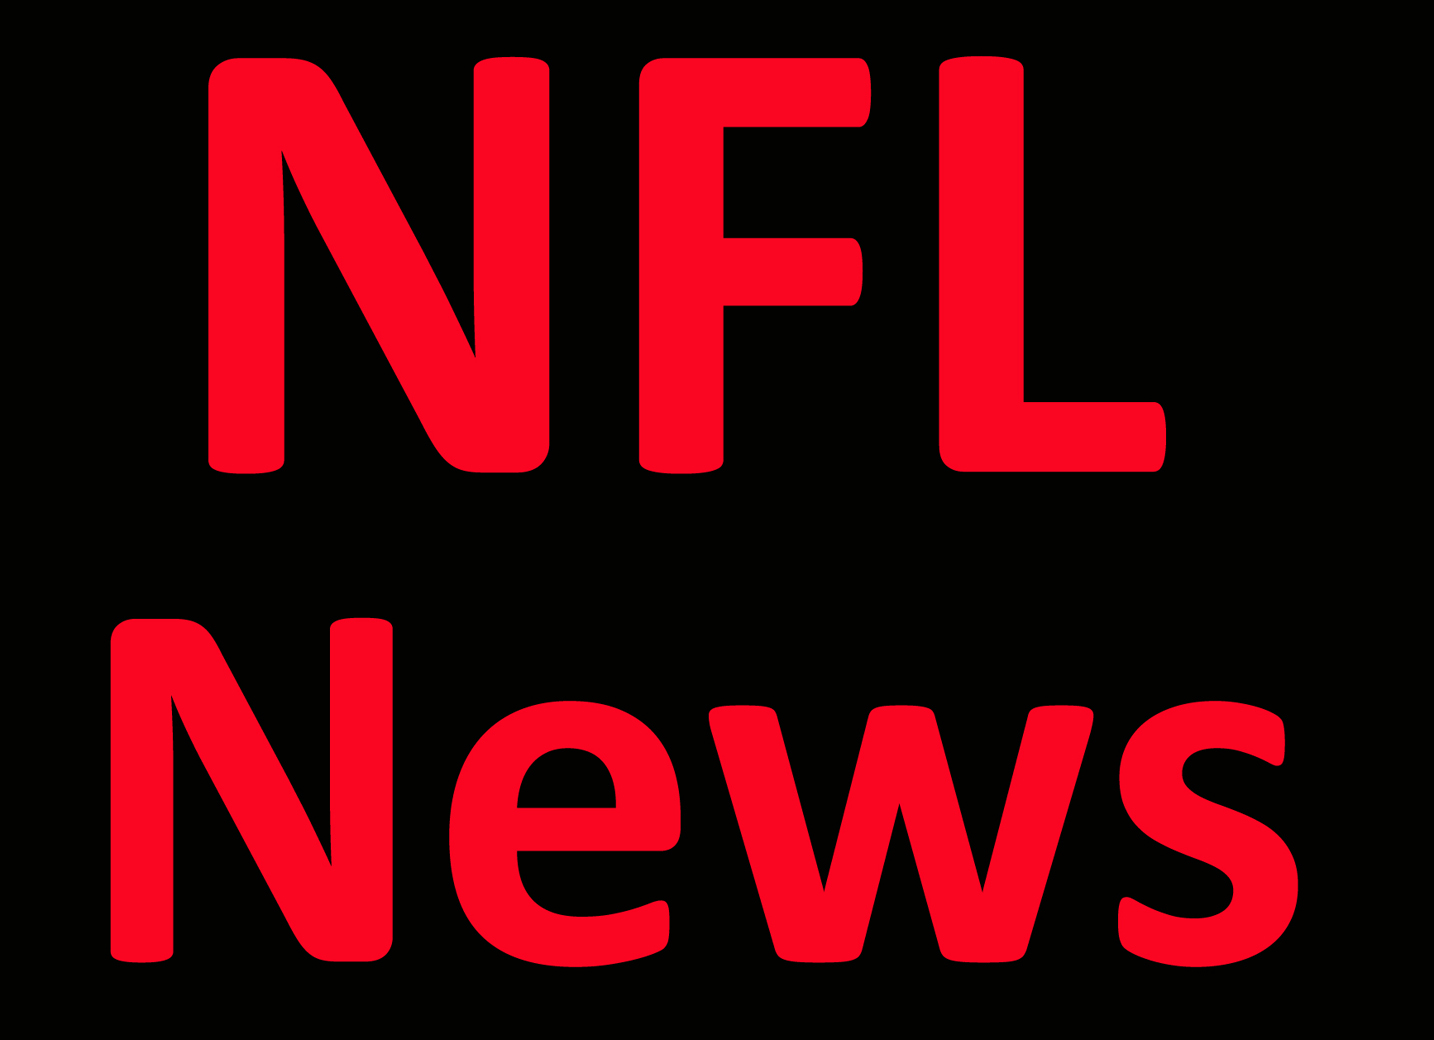 NFL News: Daily Notes: Zach Wilson out, Kittle, Johnson and Lazard statuses uncertain Per Report